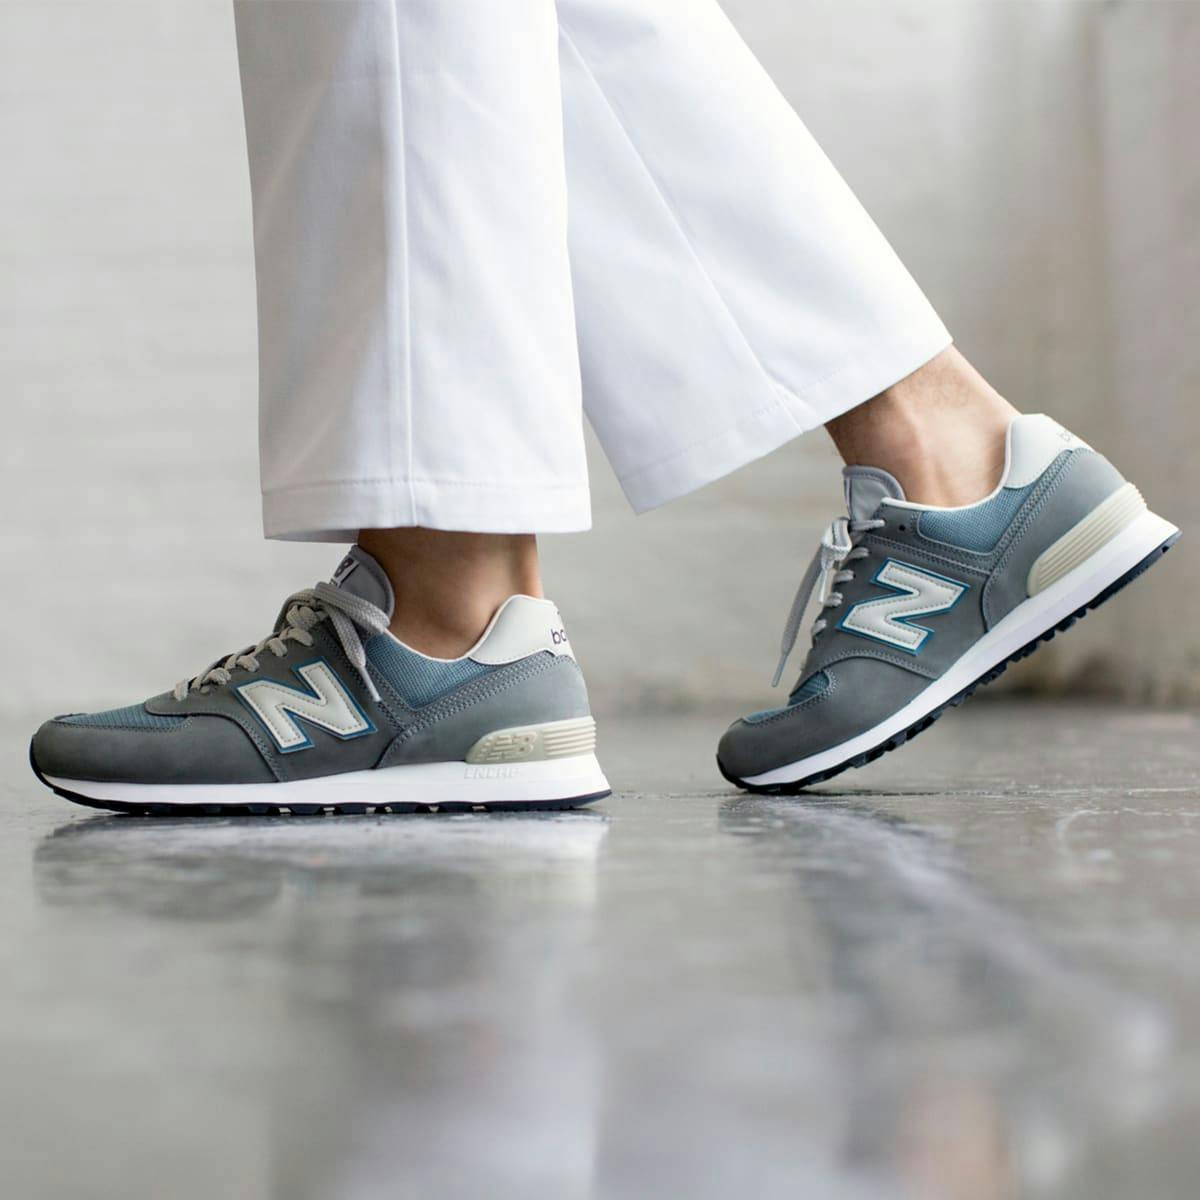 New Balance 574 'Grey Day' - Register Now on END. Launches | END.